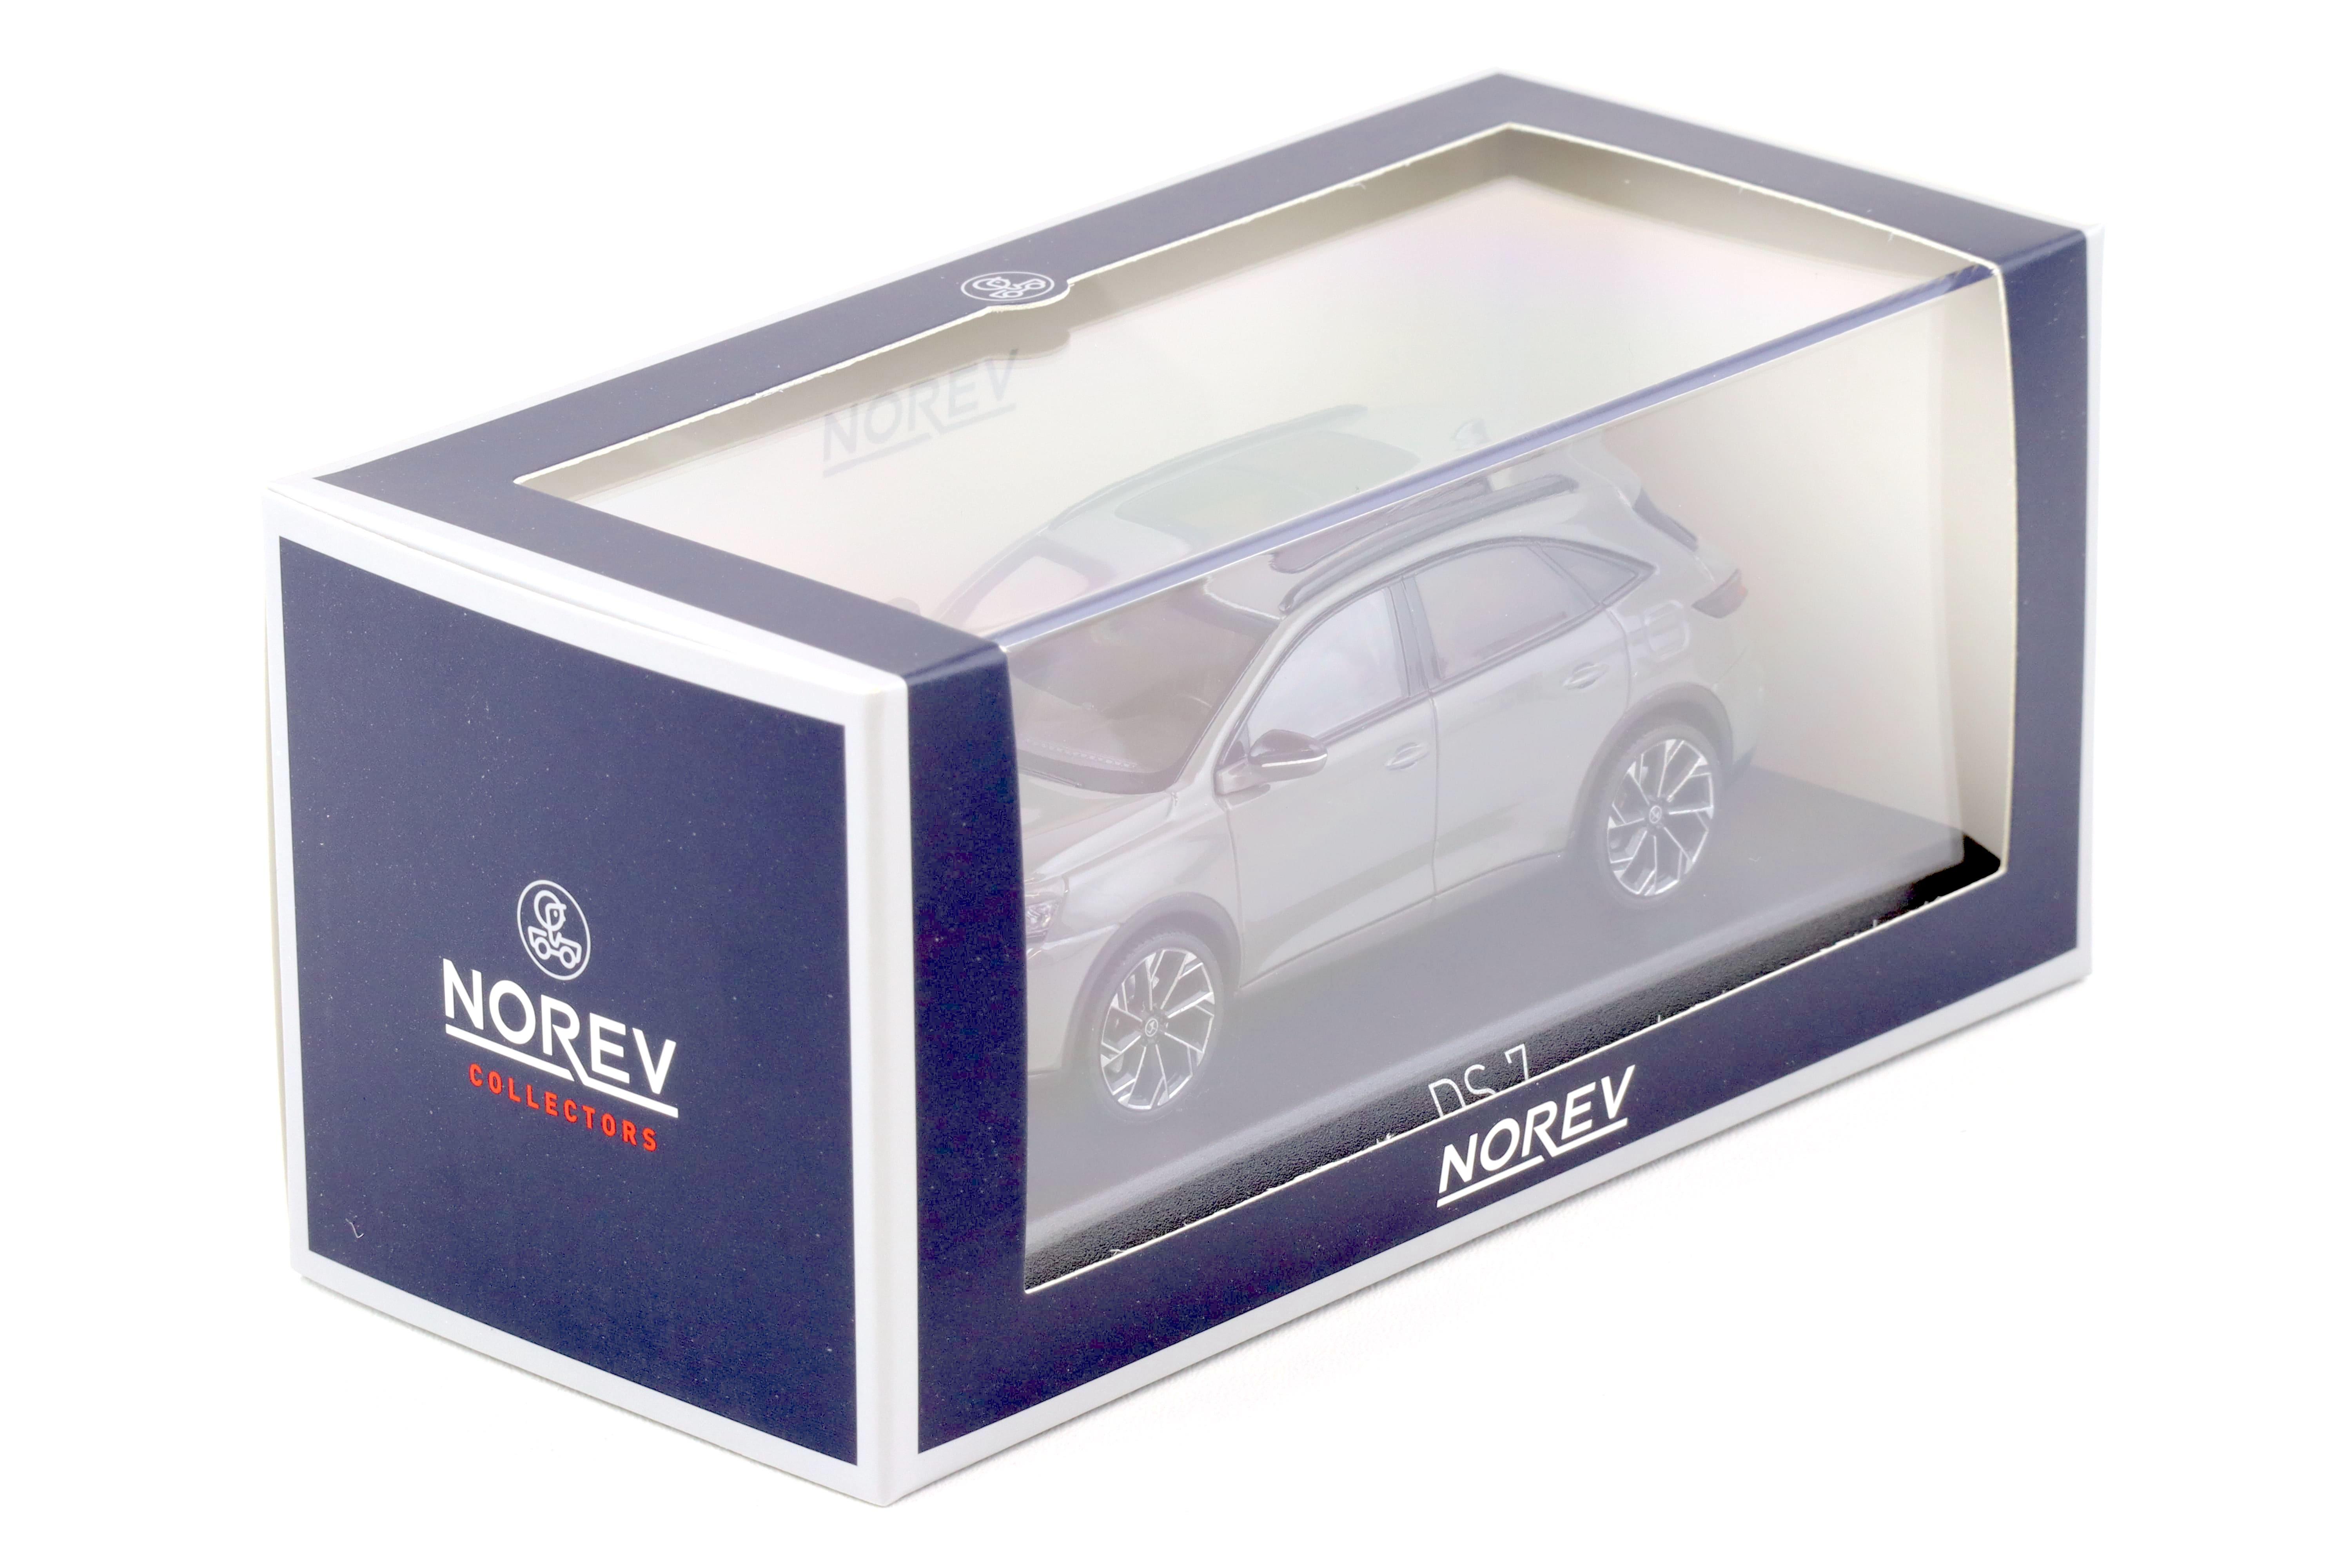 1:43 Norev Citroen DS7 2022 Lacquered grey 170050